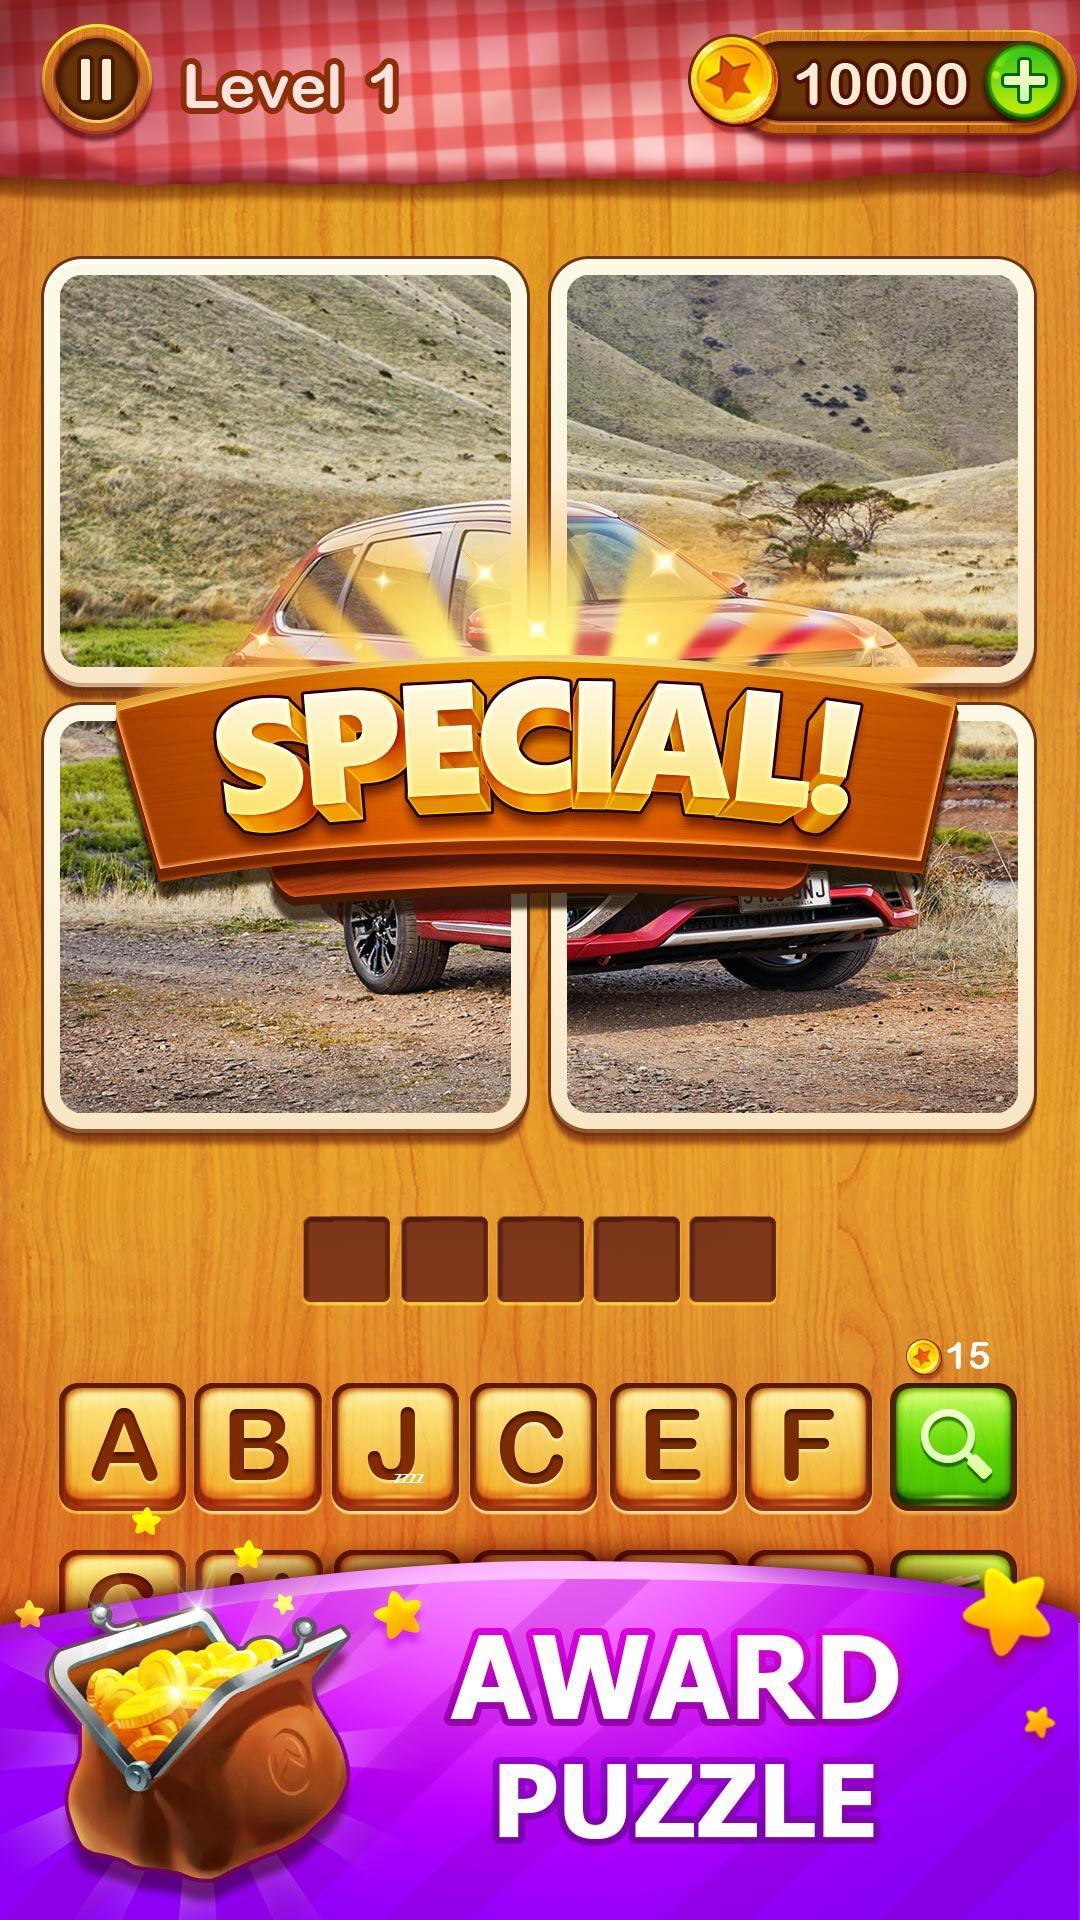 4 Pics Guess 1 Word - Word Games Puzzle screenshot game